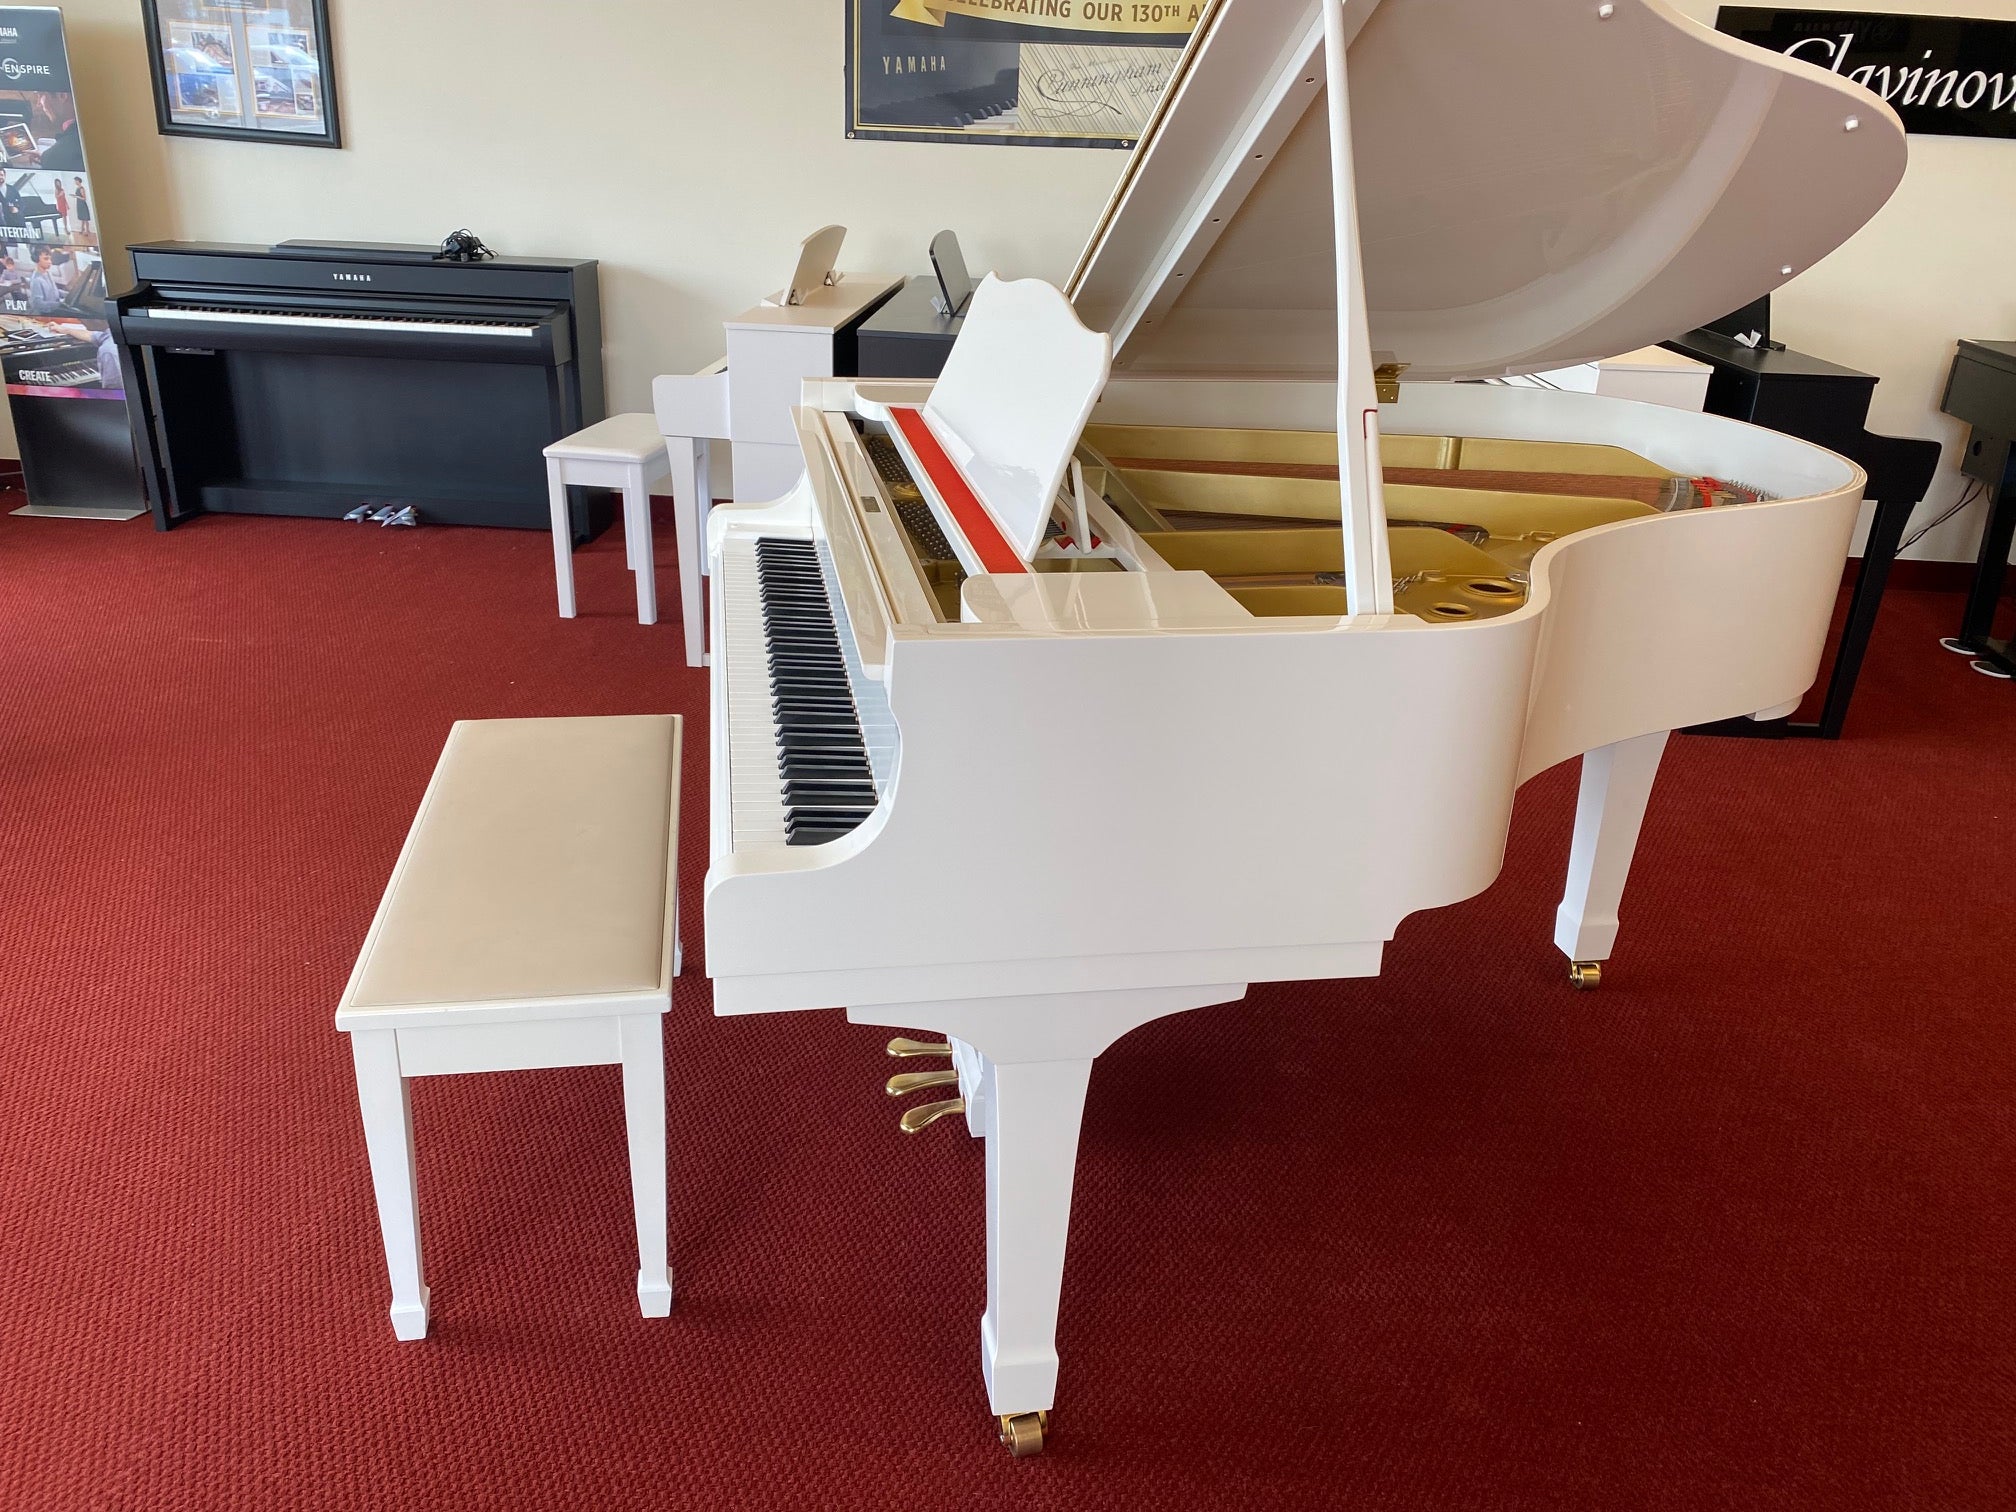 Yamaha G2 5'8" Grand Piano in Polished White Finish - Pre-Owned